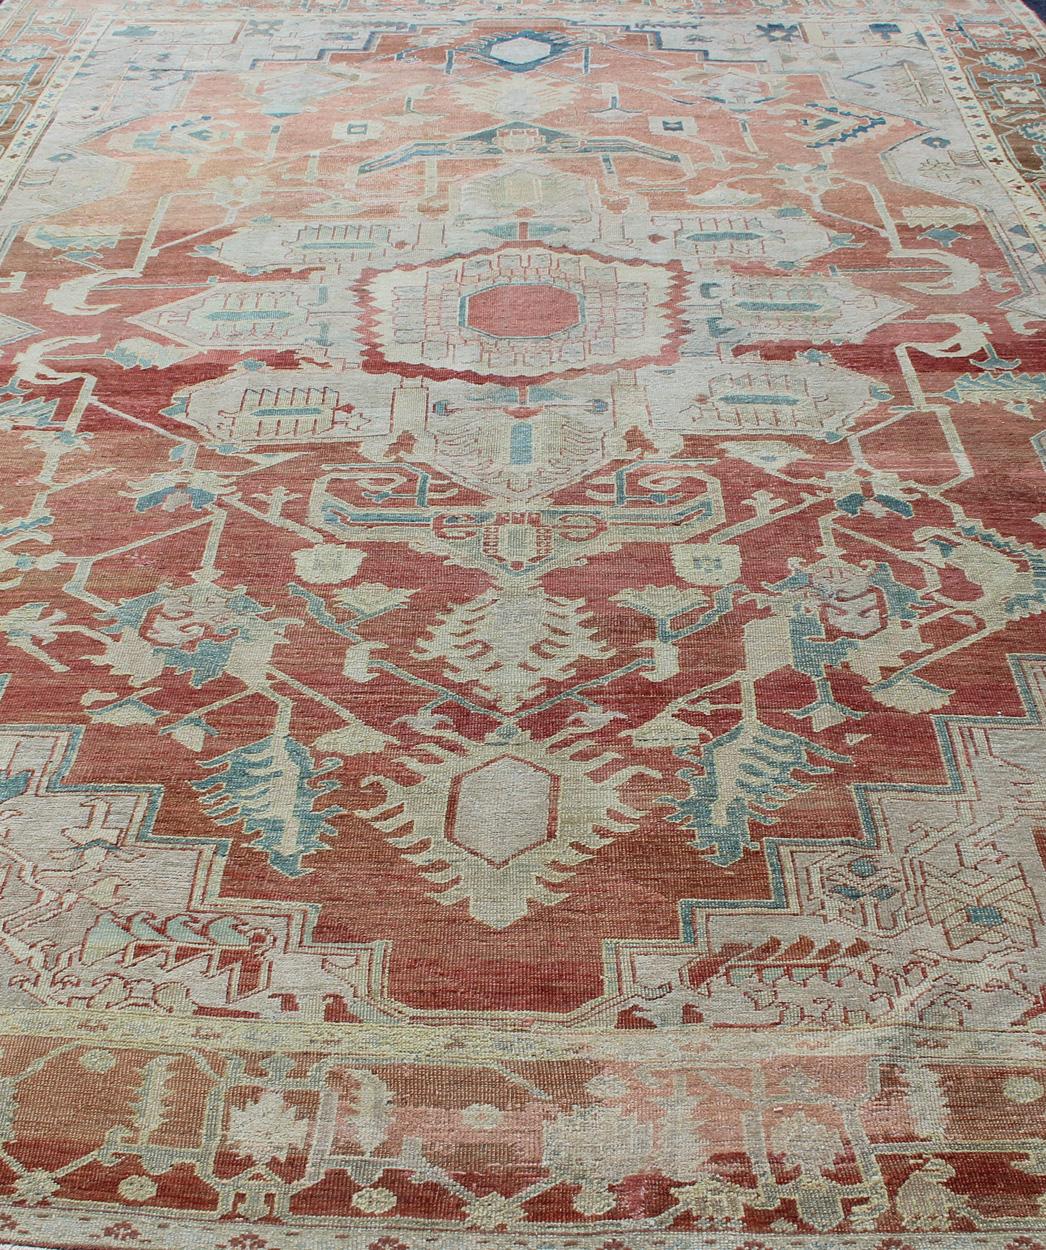 Antique Persian Large Serapi Rug in Soft Red, Taupe, Light Teal and Blue For Sale 3